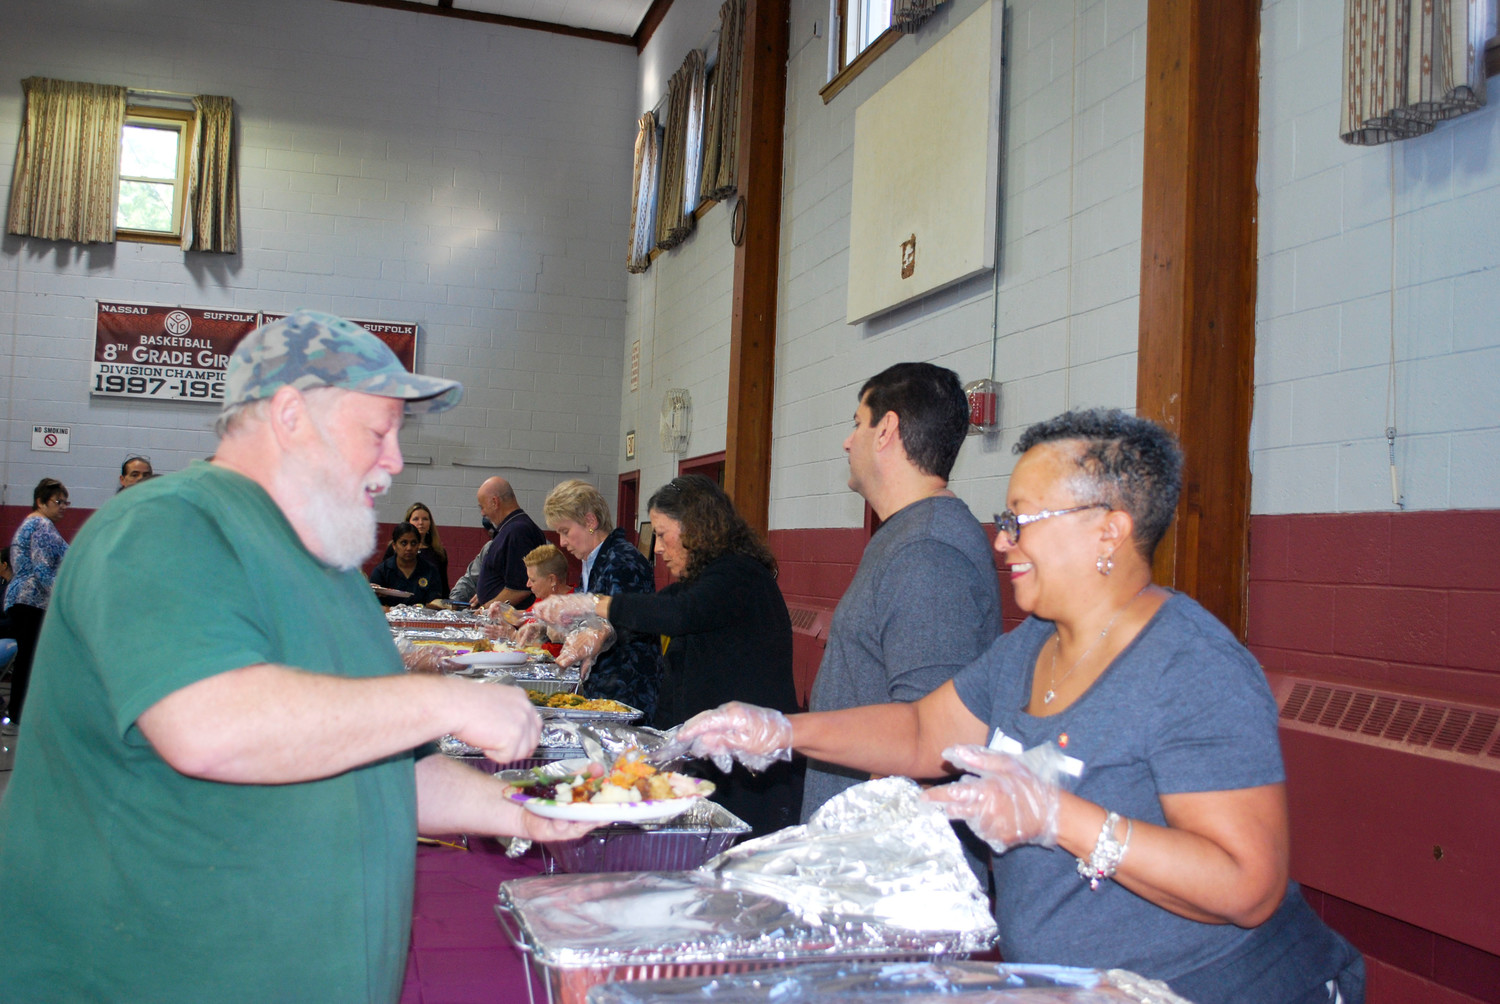 Valley Stream Lions member Monica Dingle provided service with a smile at The Club’s Thanksgiving Day lunch at the St. Joseph School in Hewlett on Nov. 20.